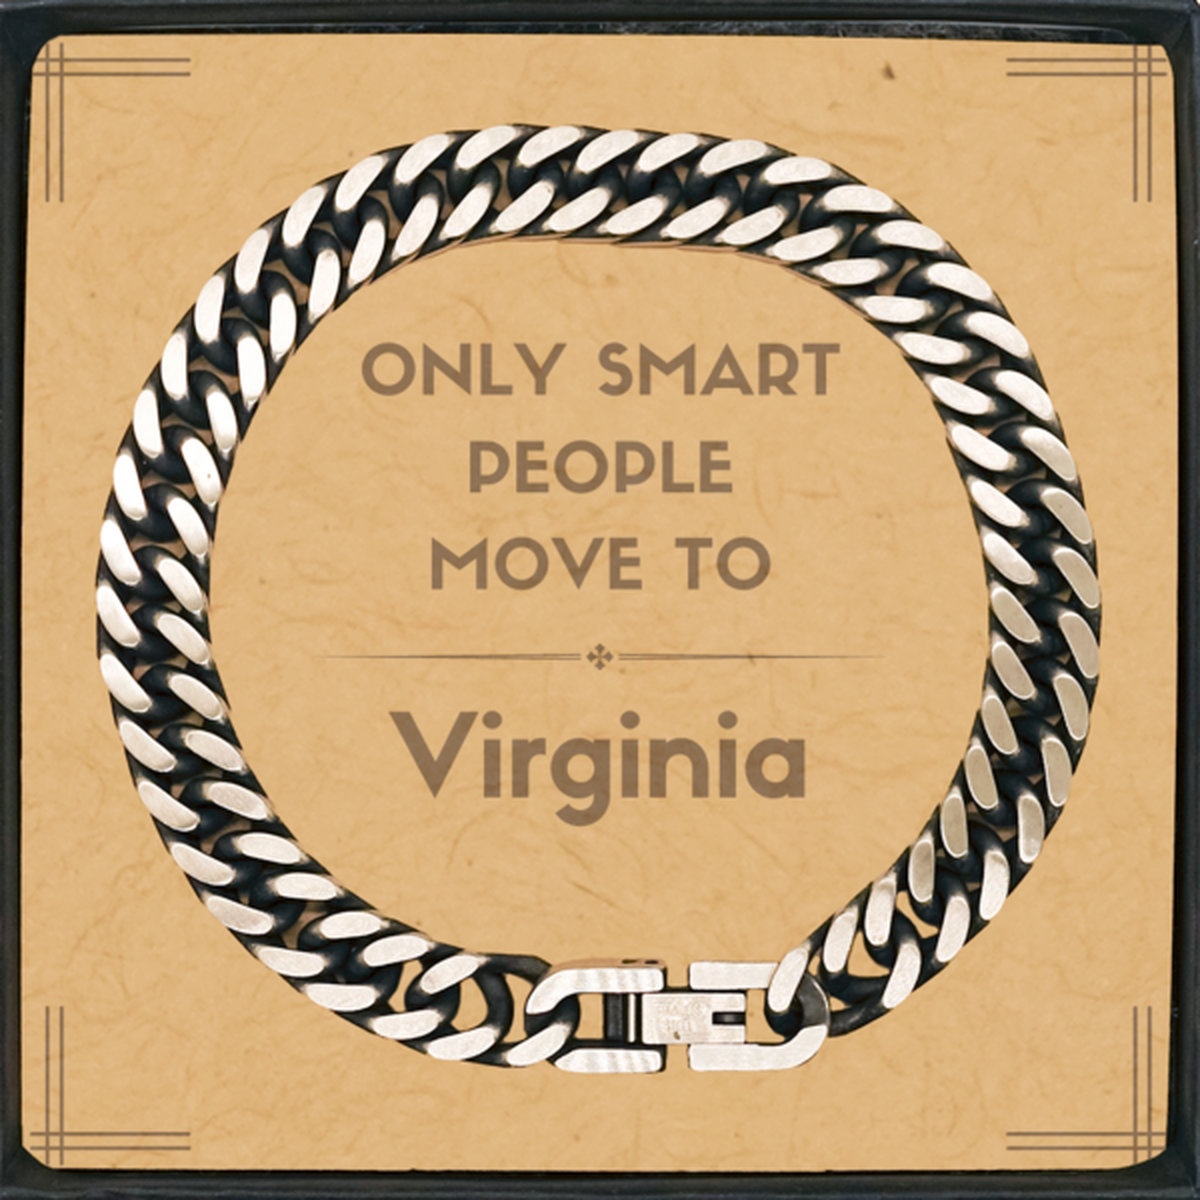 Only smart people move to Virginia Cuban Link Chain Bracelet, Message Card Gifts For Virginia, Move to Virginia Gifts for Friends Coworker Funny Saying Quote